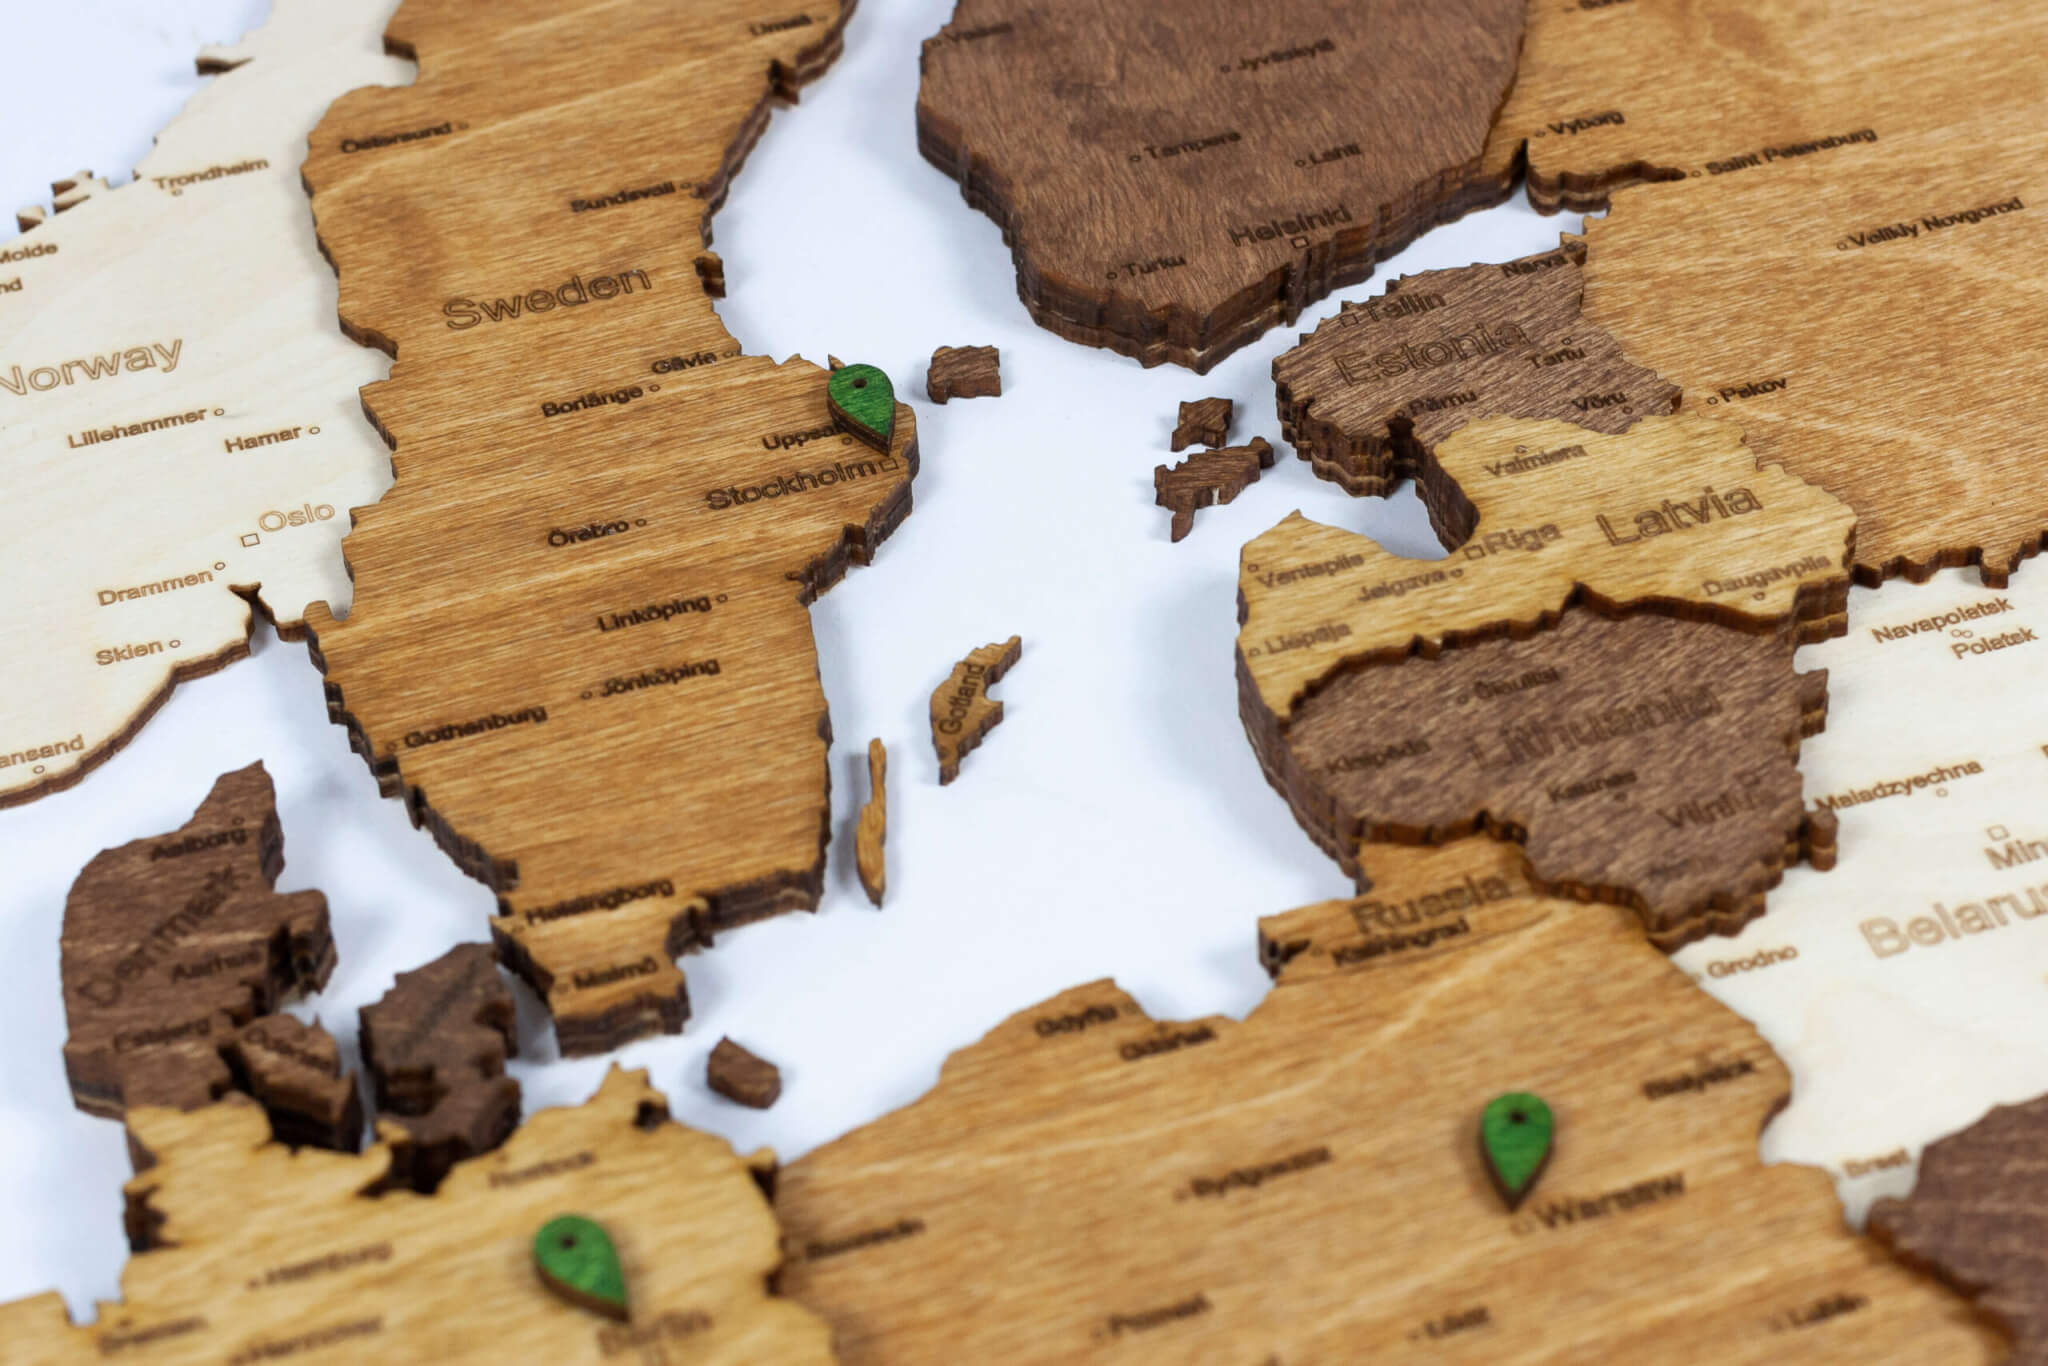 3D Wooden Wall Map of Europe - 68travel